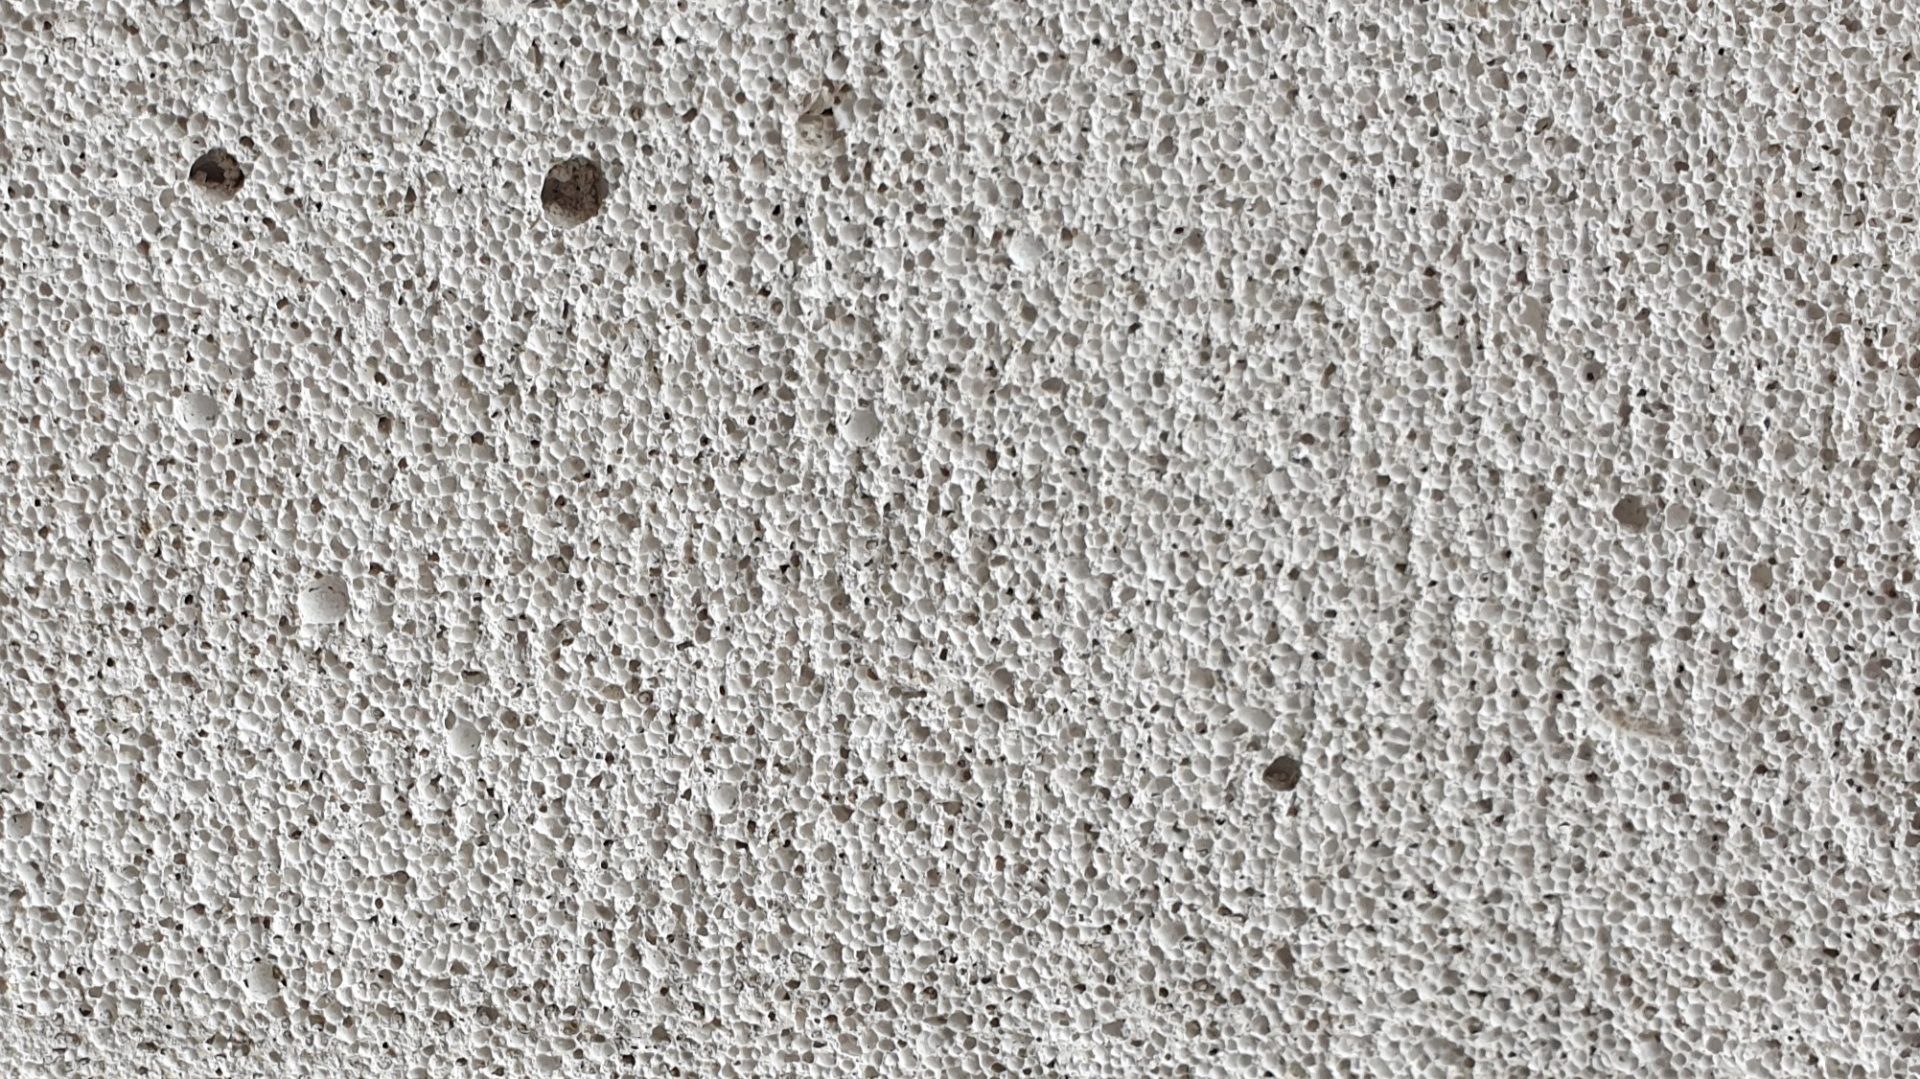 Reinforced Autoclaved Aerated Concrete (RAAC) (image: Dreamstime)